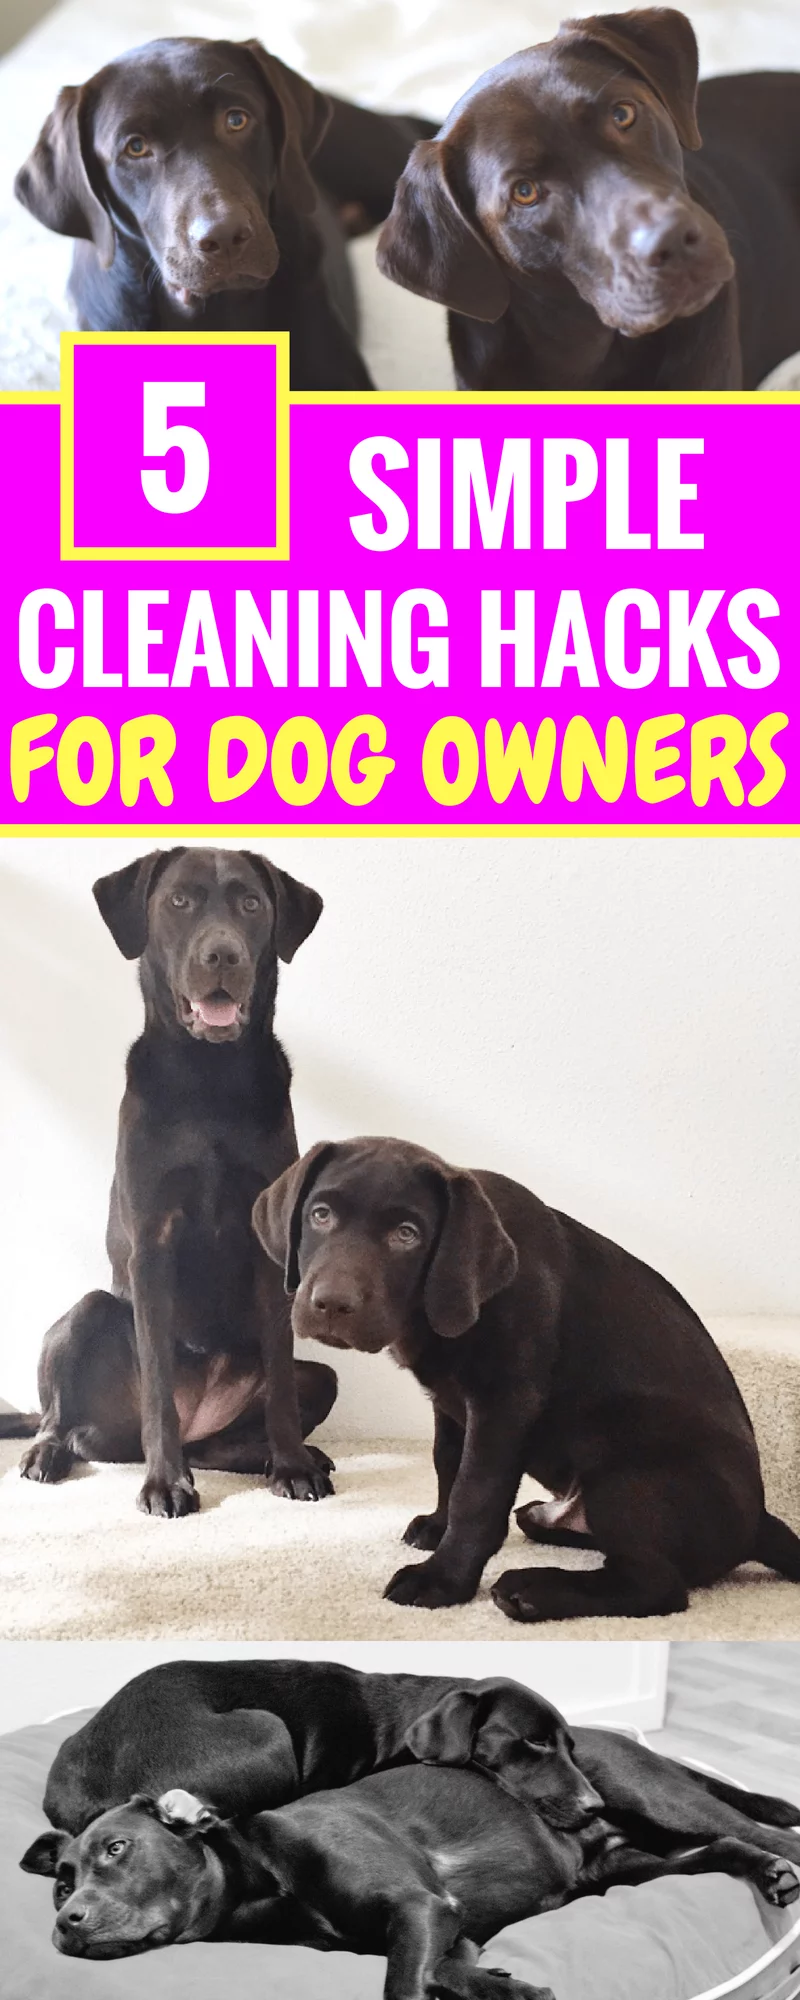 5 Simple Cleaning Hacks For Dog Owners - How I keep my house clean with two dogs - Life Hacks For Pet Owners - Cleaning Tips - Tips For Pet Owners - House Cleaning Tips - Chocolate Labradors - Communikait by Kait Hanson